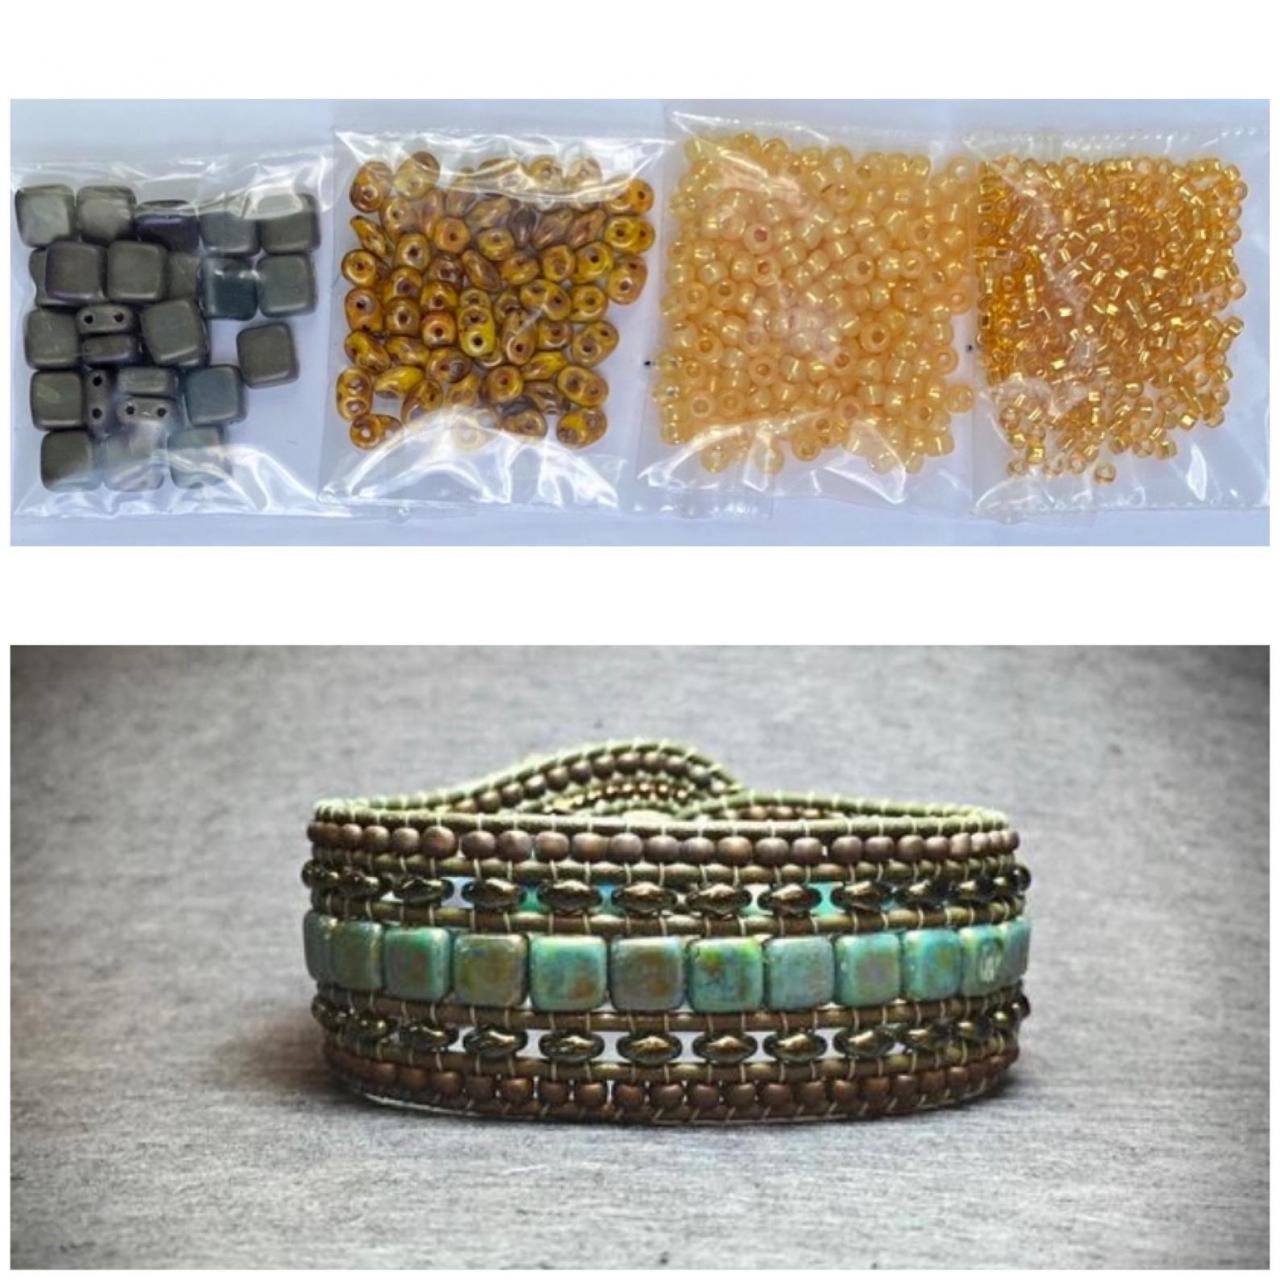 Kit Wide Leather Beaded Cuff Bonny Mustard Picasso Gray Intermediate Instructions Complete No Tools #26